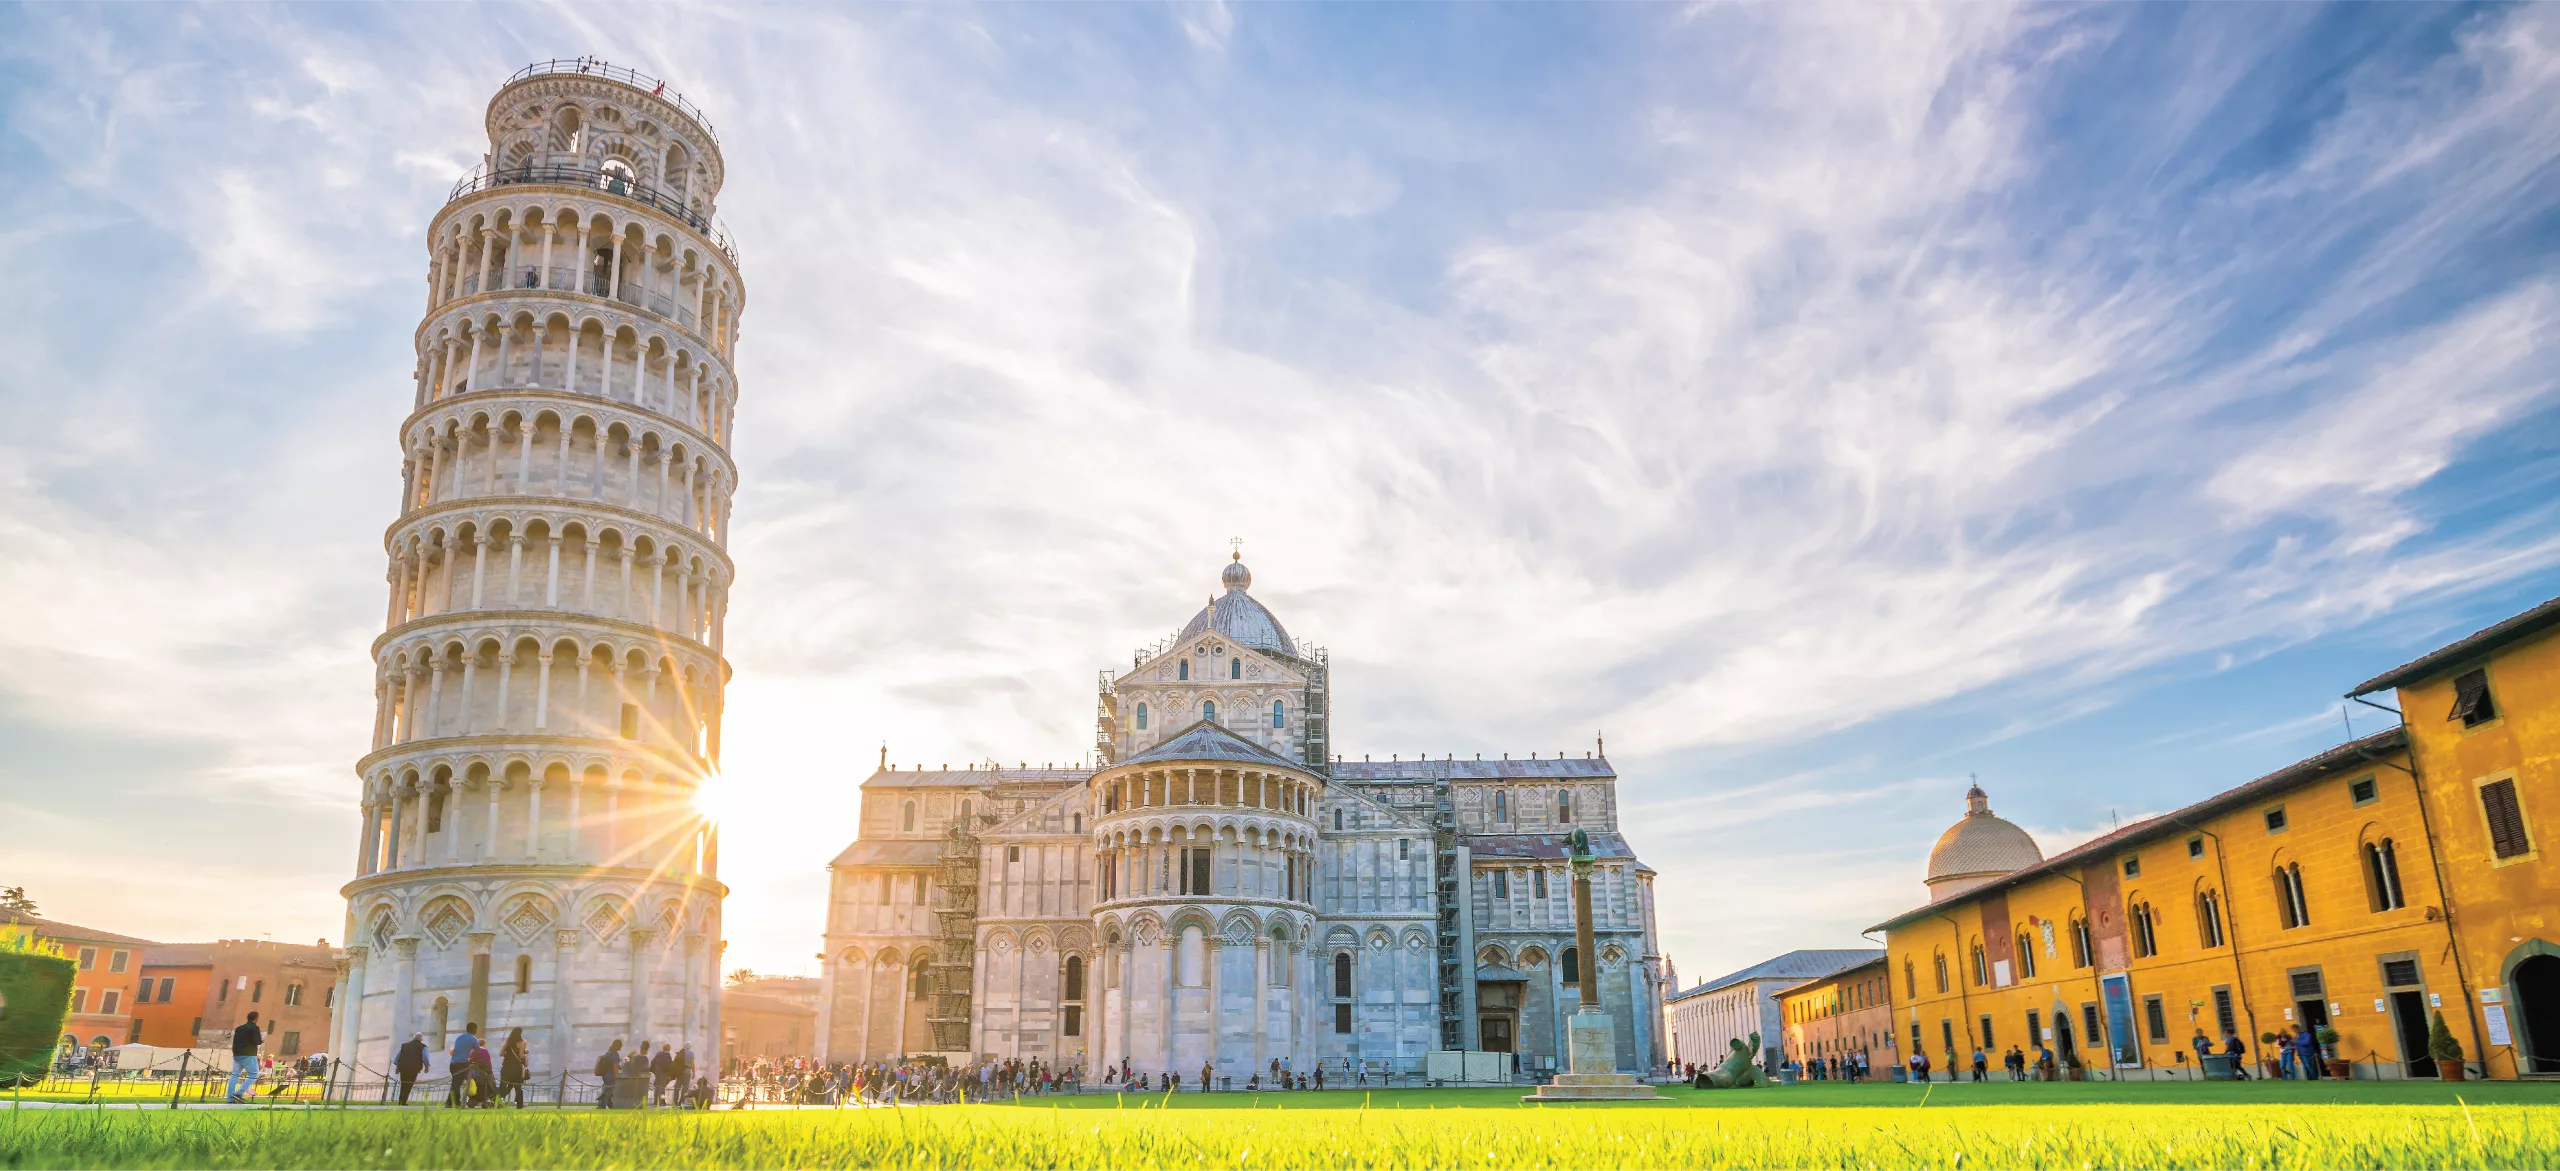 4 Must Visit Attractions in and around the Leaning Tower of Pisa